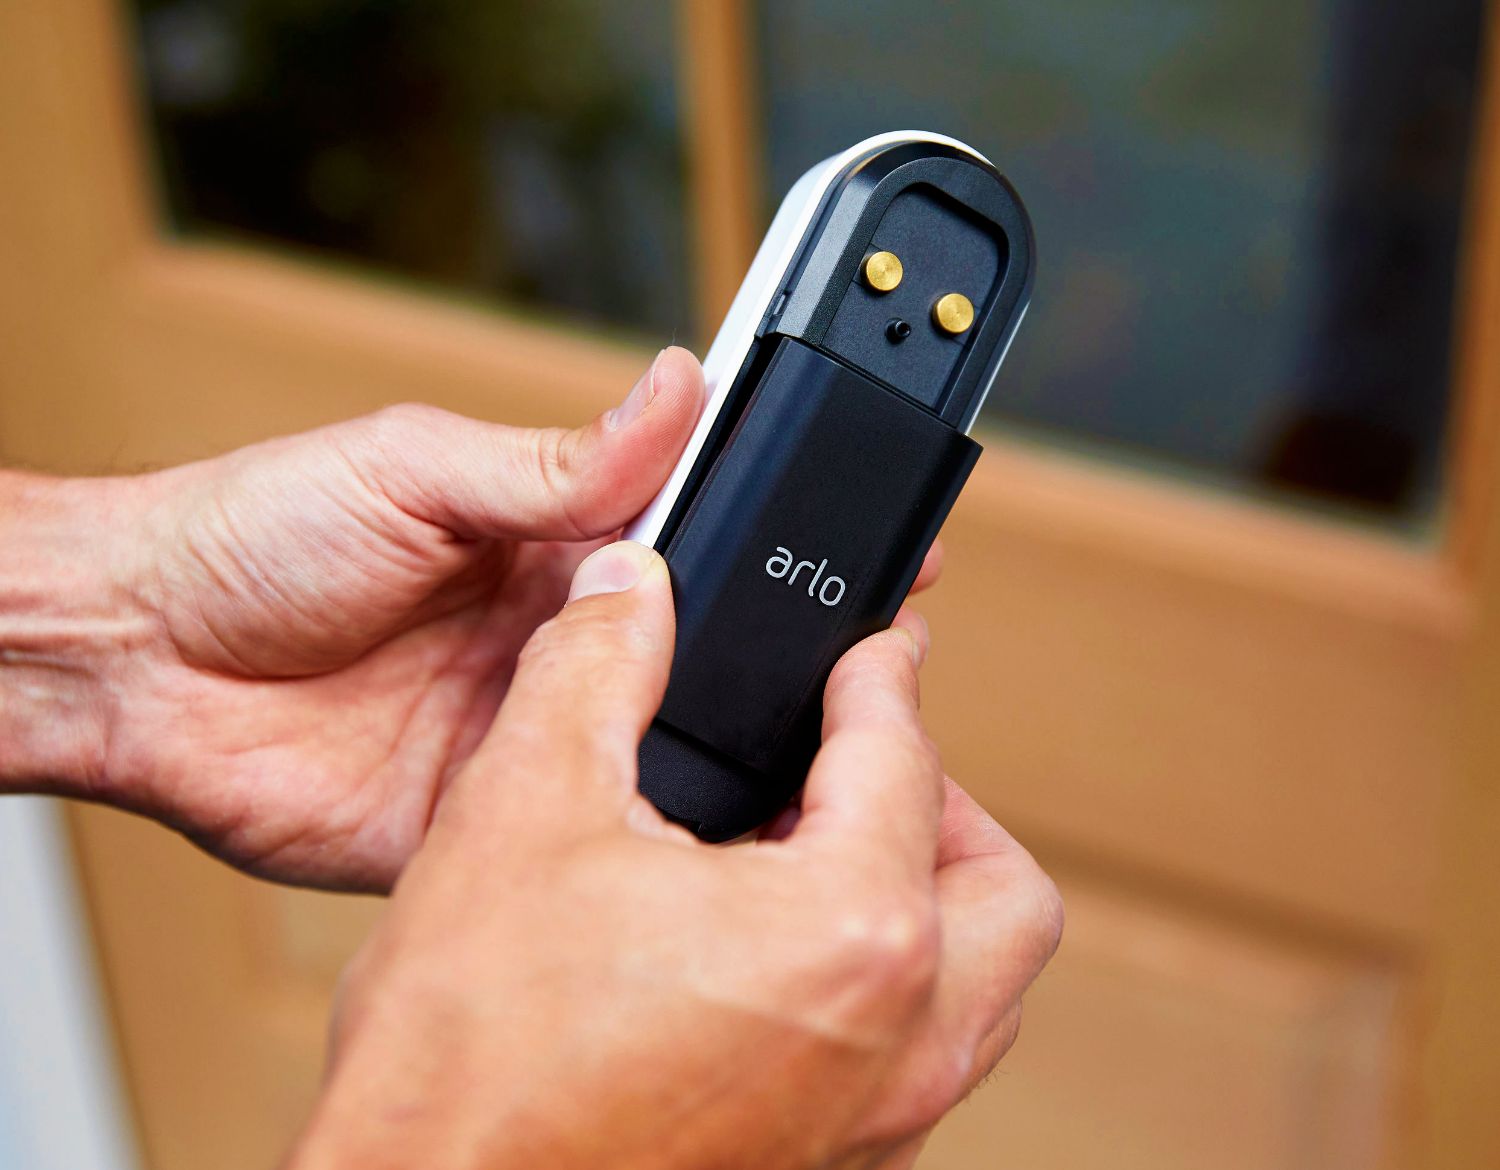 A person inserts a rechargeable battery into an Arlo wire-free video doorbell and chime